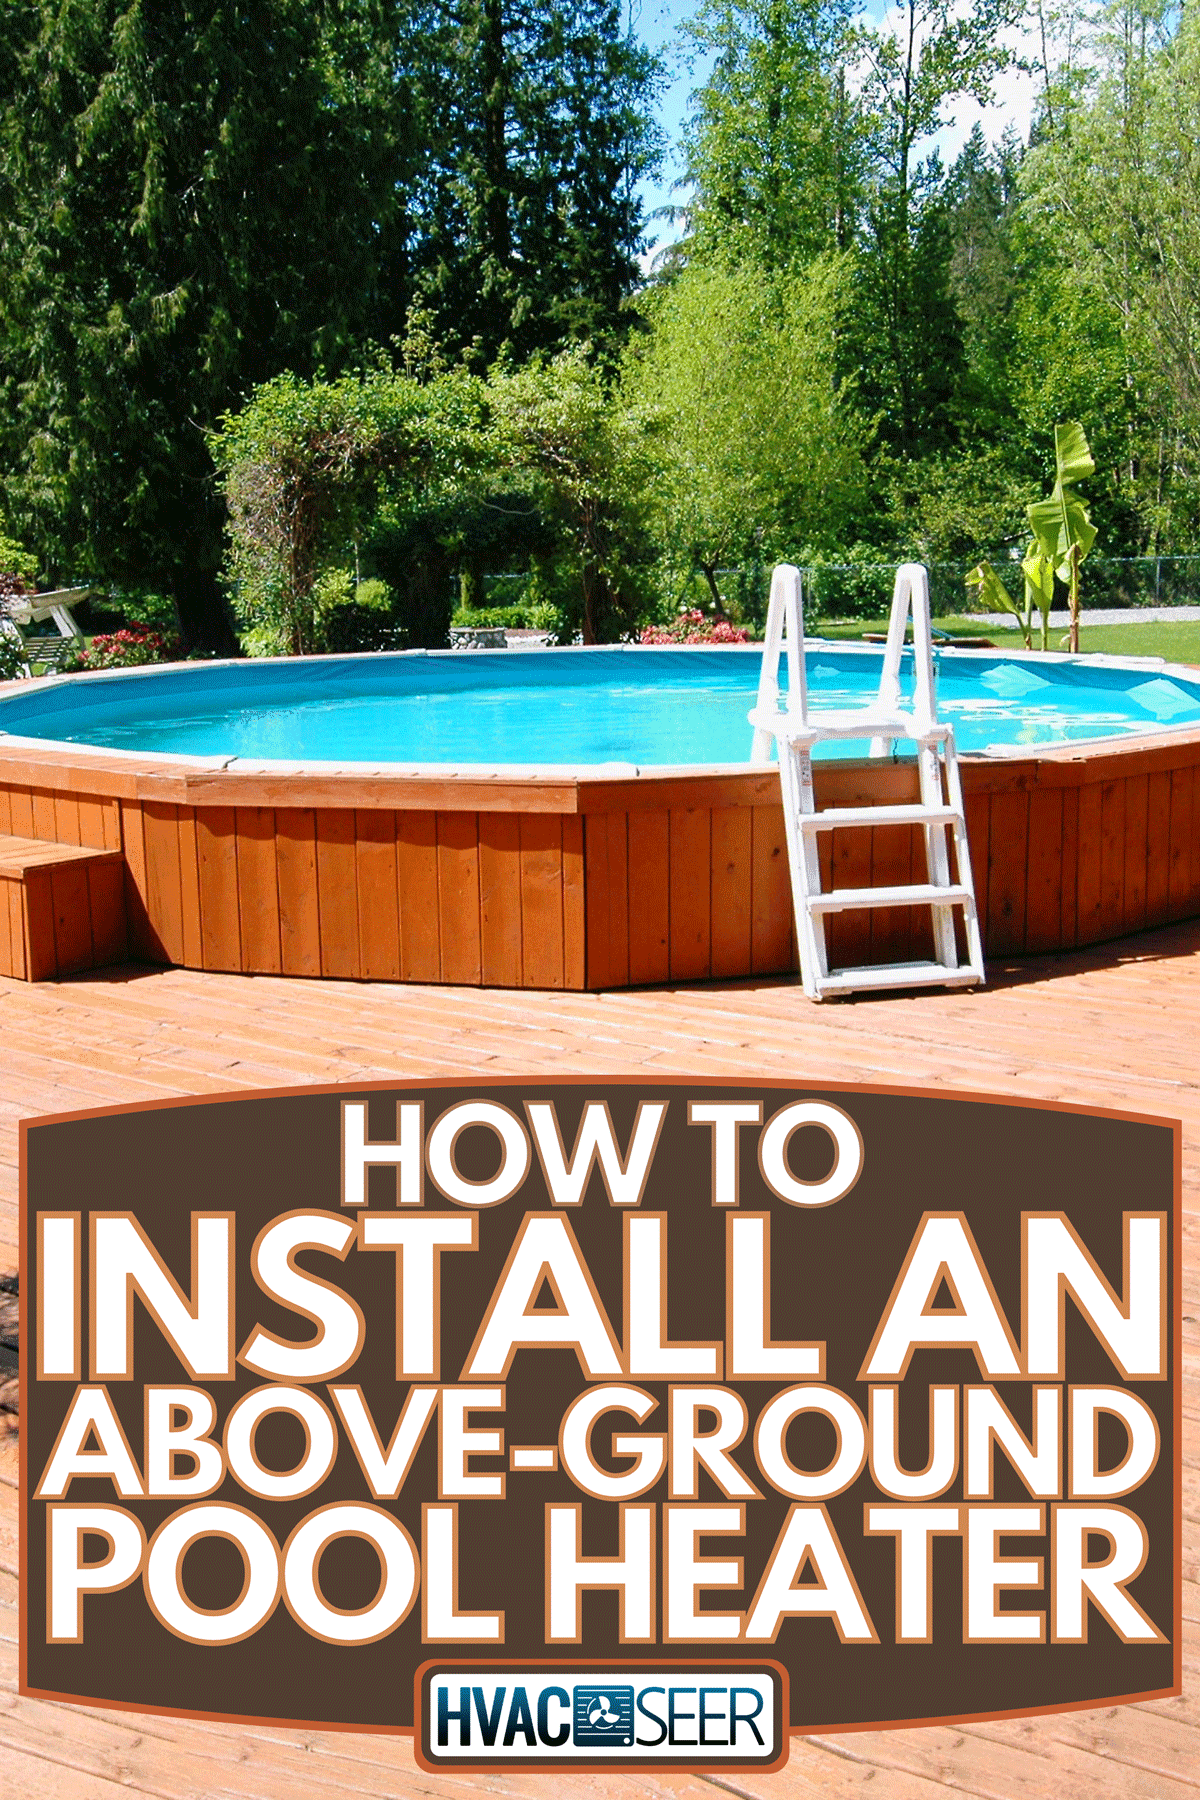 Above ground back yard pool, How To Install An Above-Ground Pool Heater